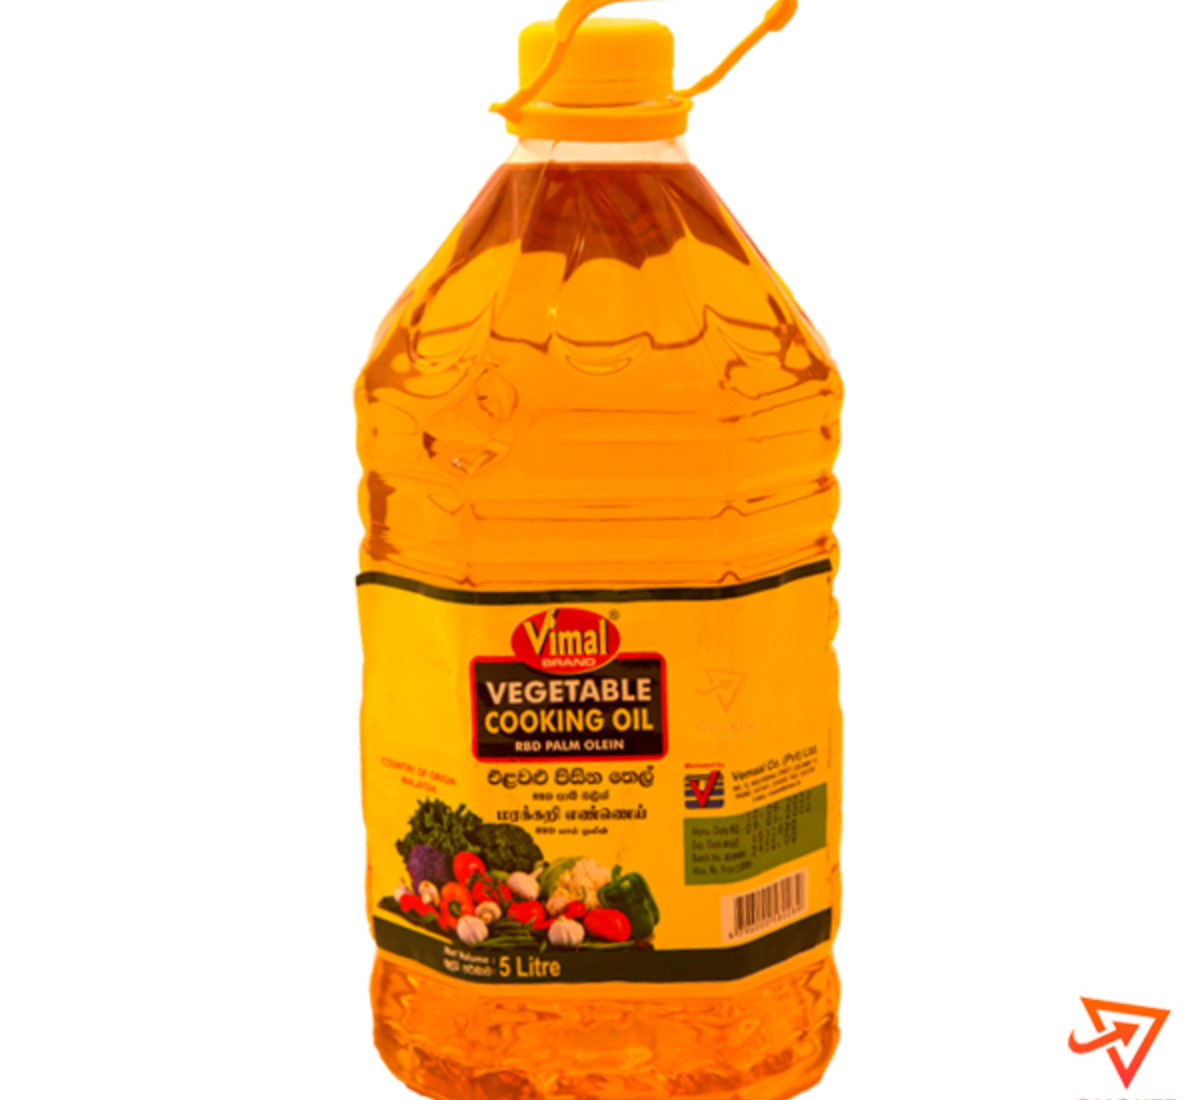 Clicker product 5L VIMAL vegetable cooking oil 877